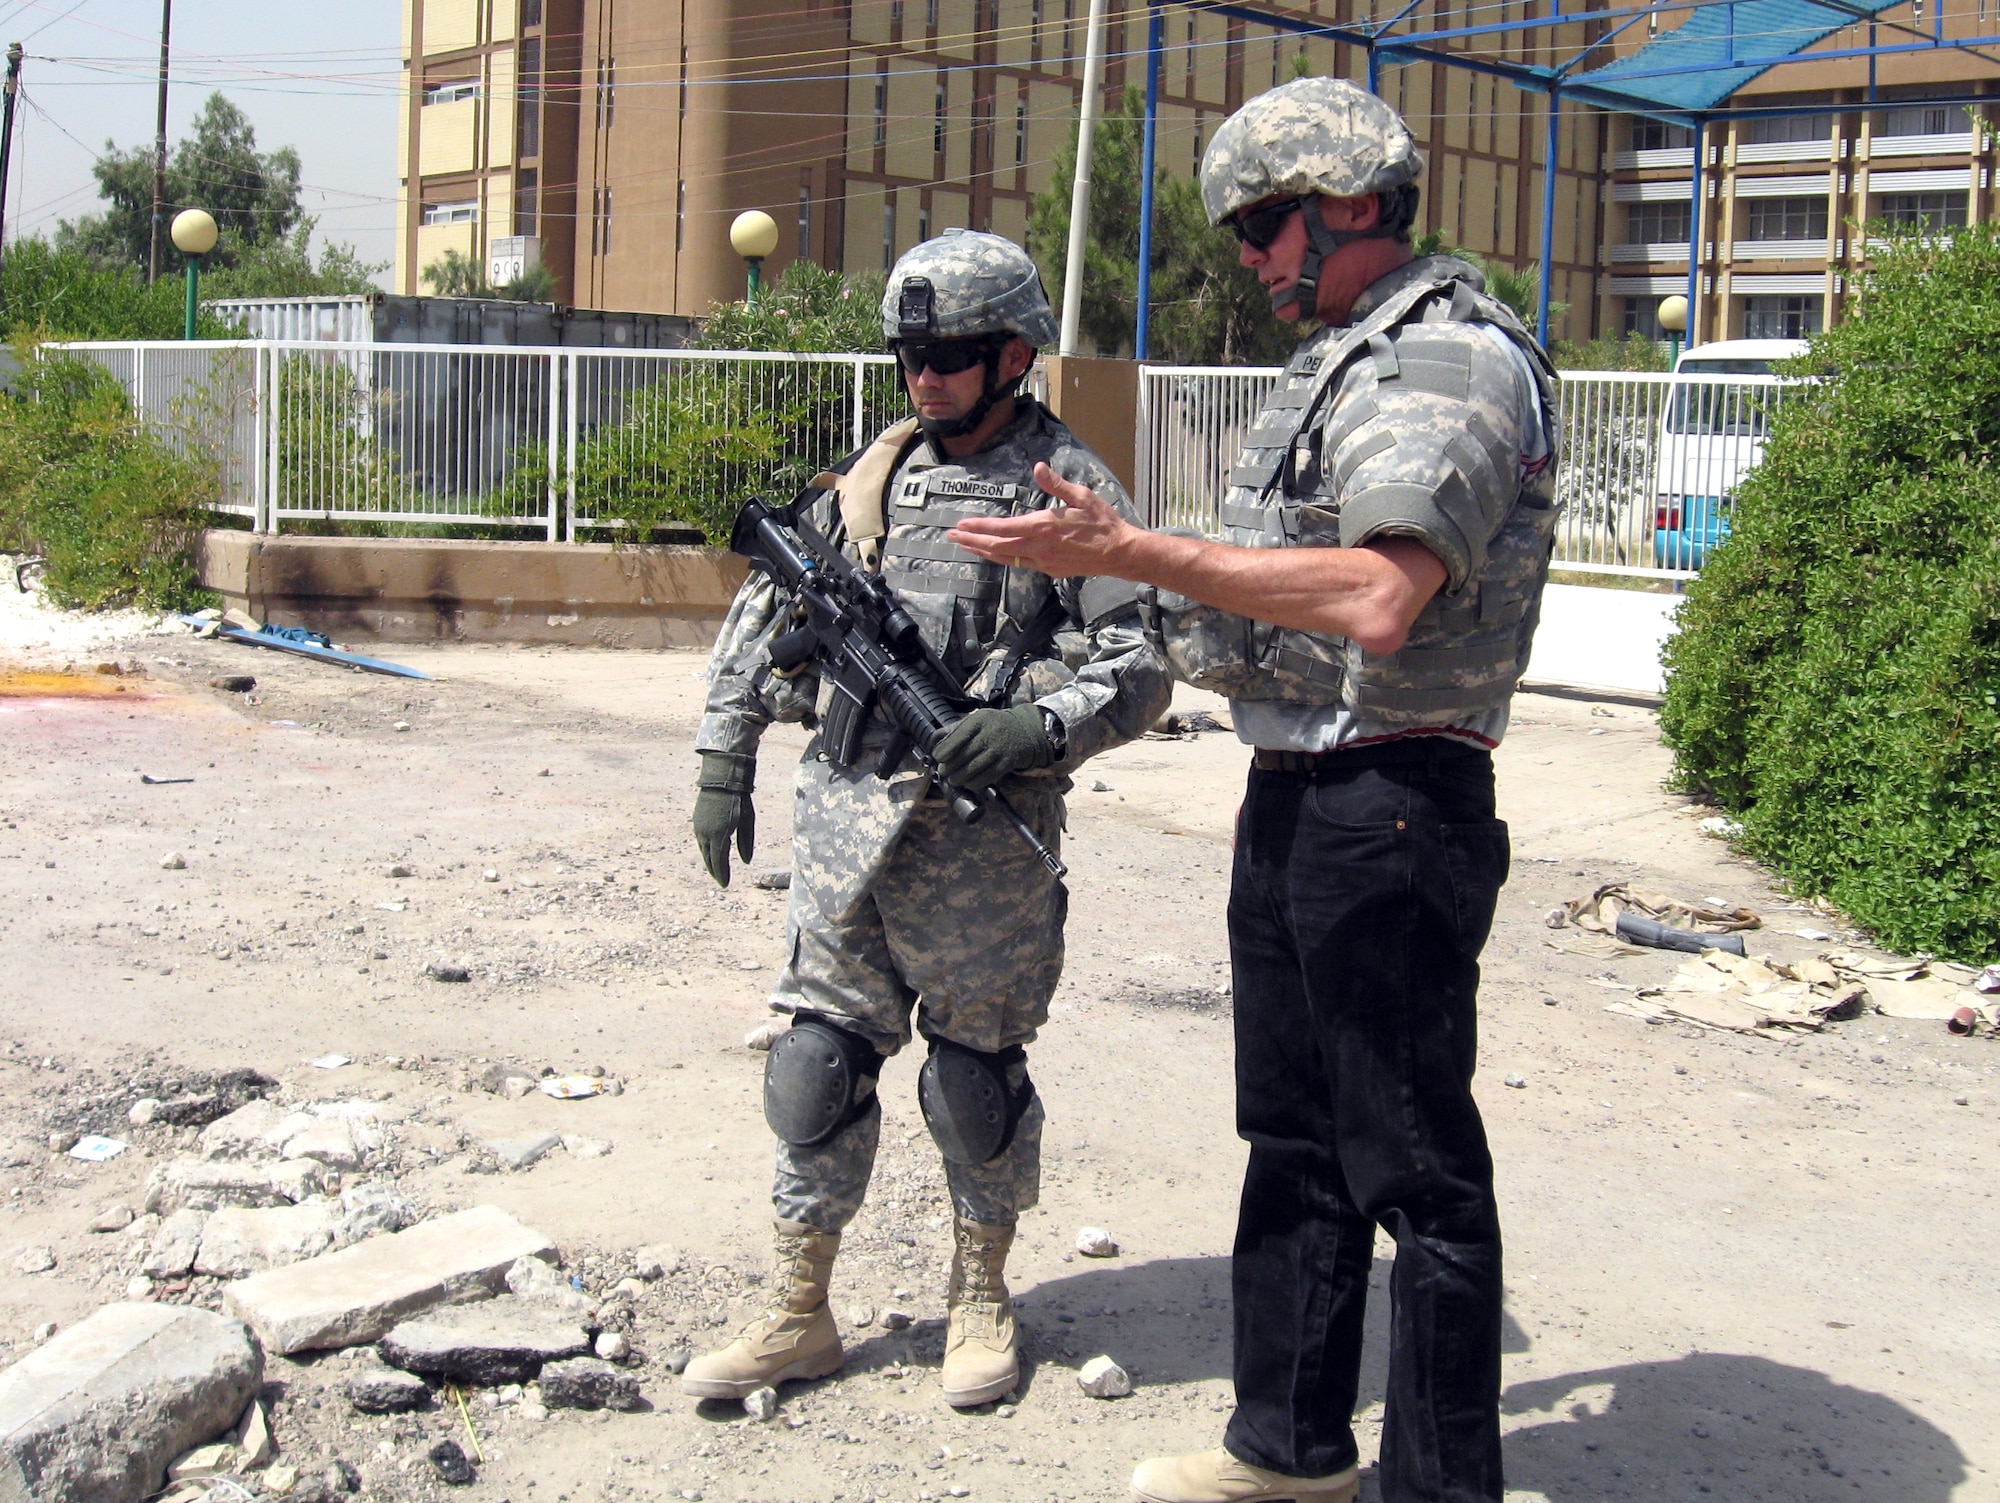 Bob Perry and Capt. Christian Thompson assess the damage done to a high voltage electrical line while deployed in support of Operation Iraqi Freedom in July 2007.  The line, which leads to a children's hospital, was damaged by an improvised explosive device. Earlier this year, Air Force senior leaders outlined their vision for supporting Department of Defense civilians to serve in global expeditionary positions through a program called the Civilian Expeditionary Workforce. (Courtesy photo) 